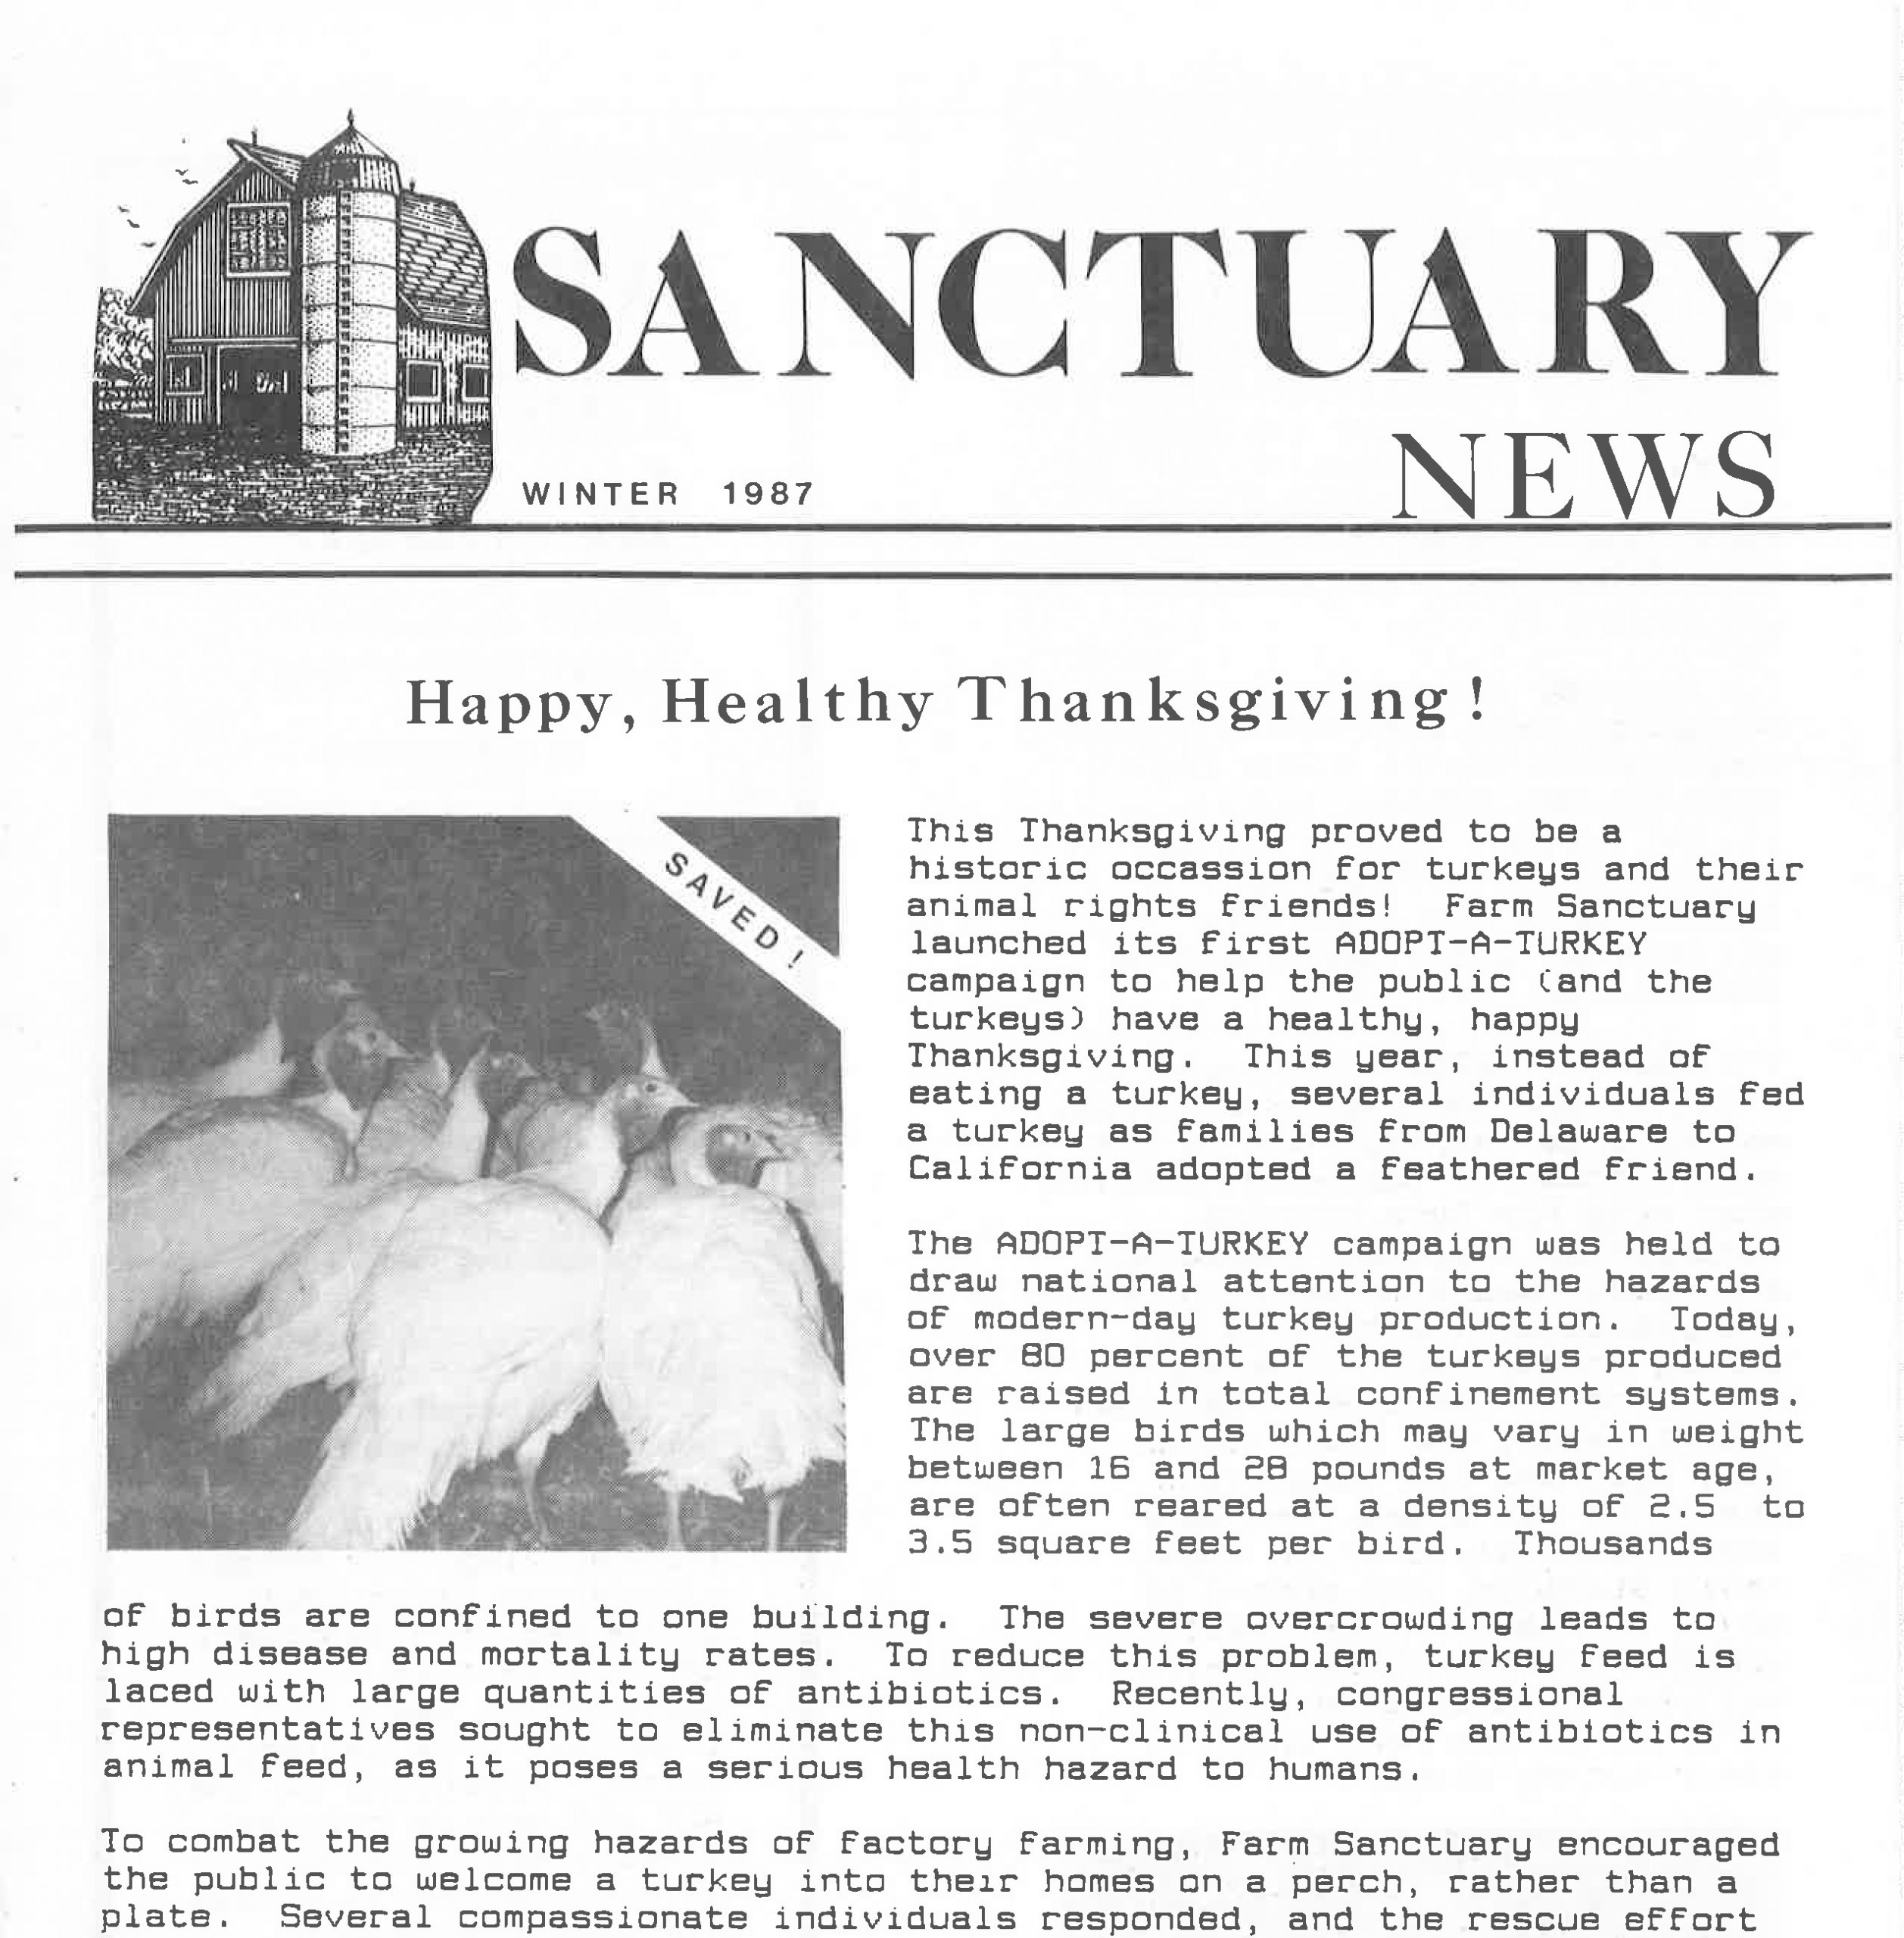 A clipping of the 1987 Winter issue of Sanctuary News featuring a story about the Adopt a Turkey program